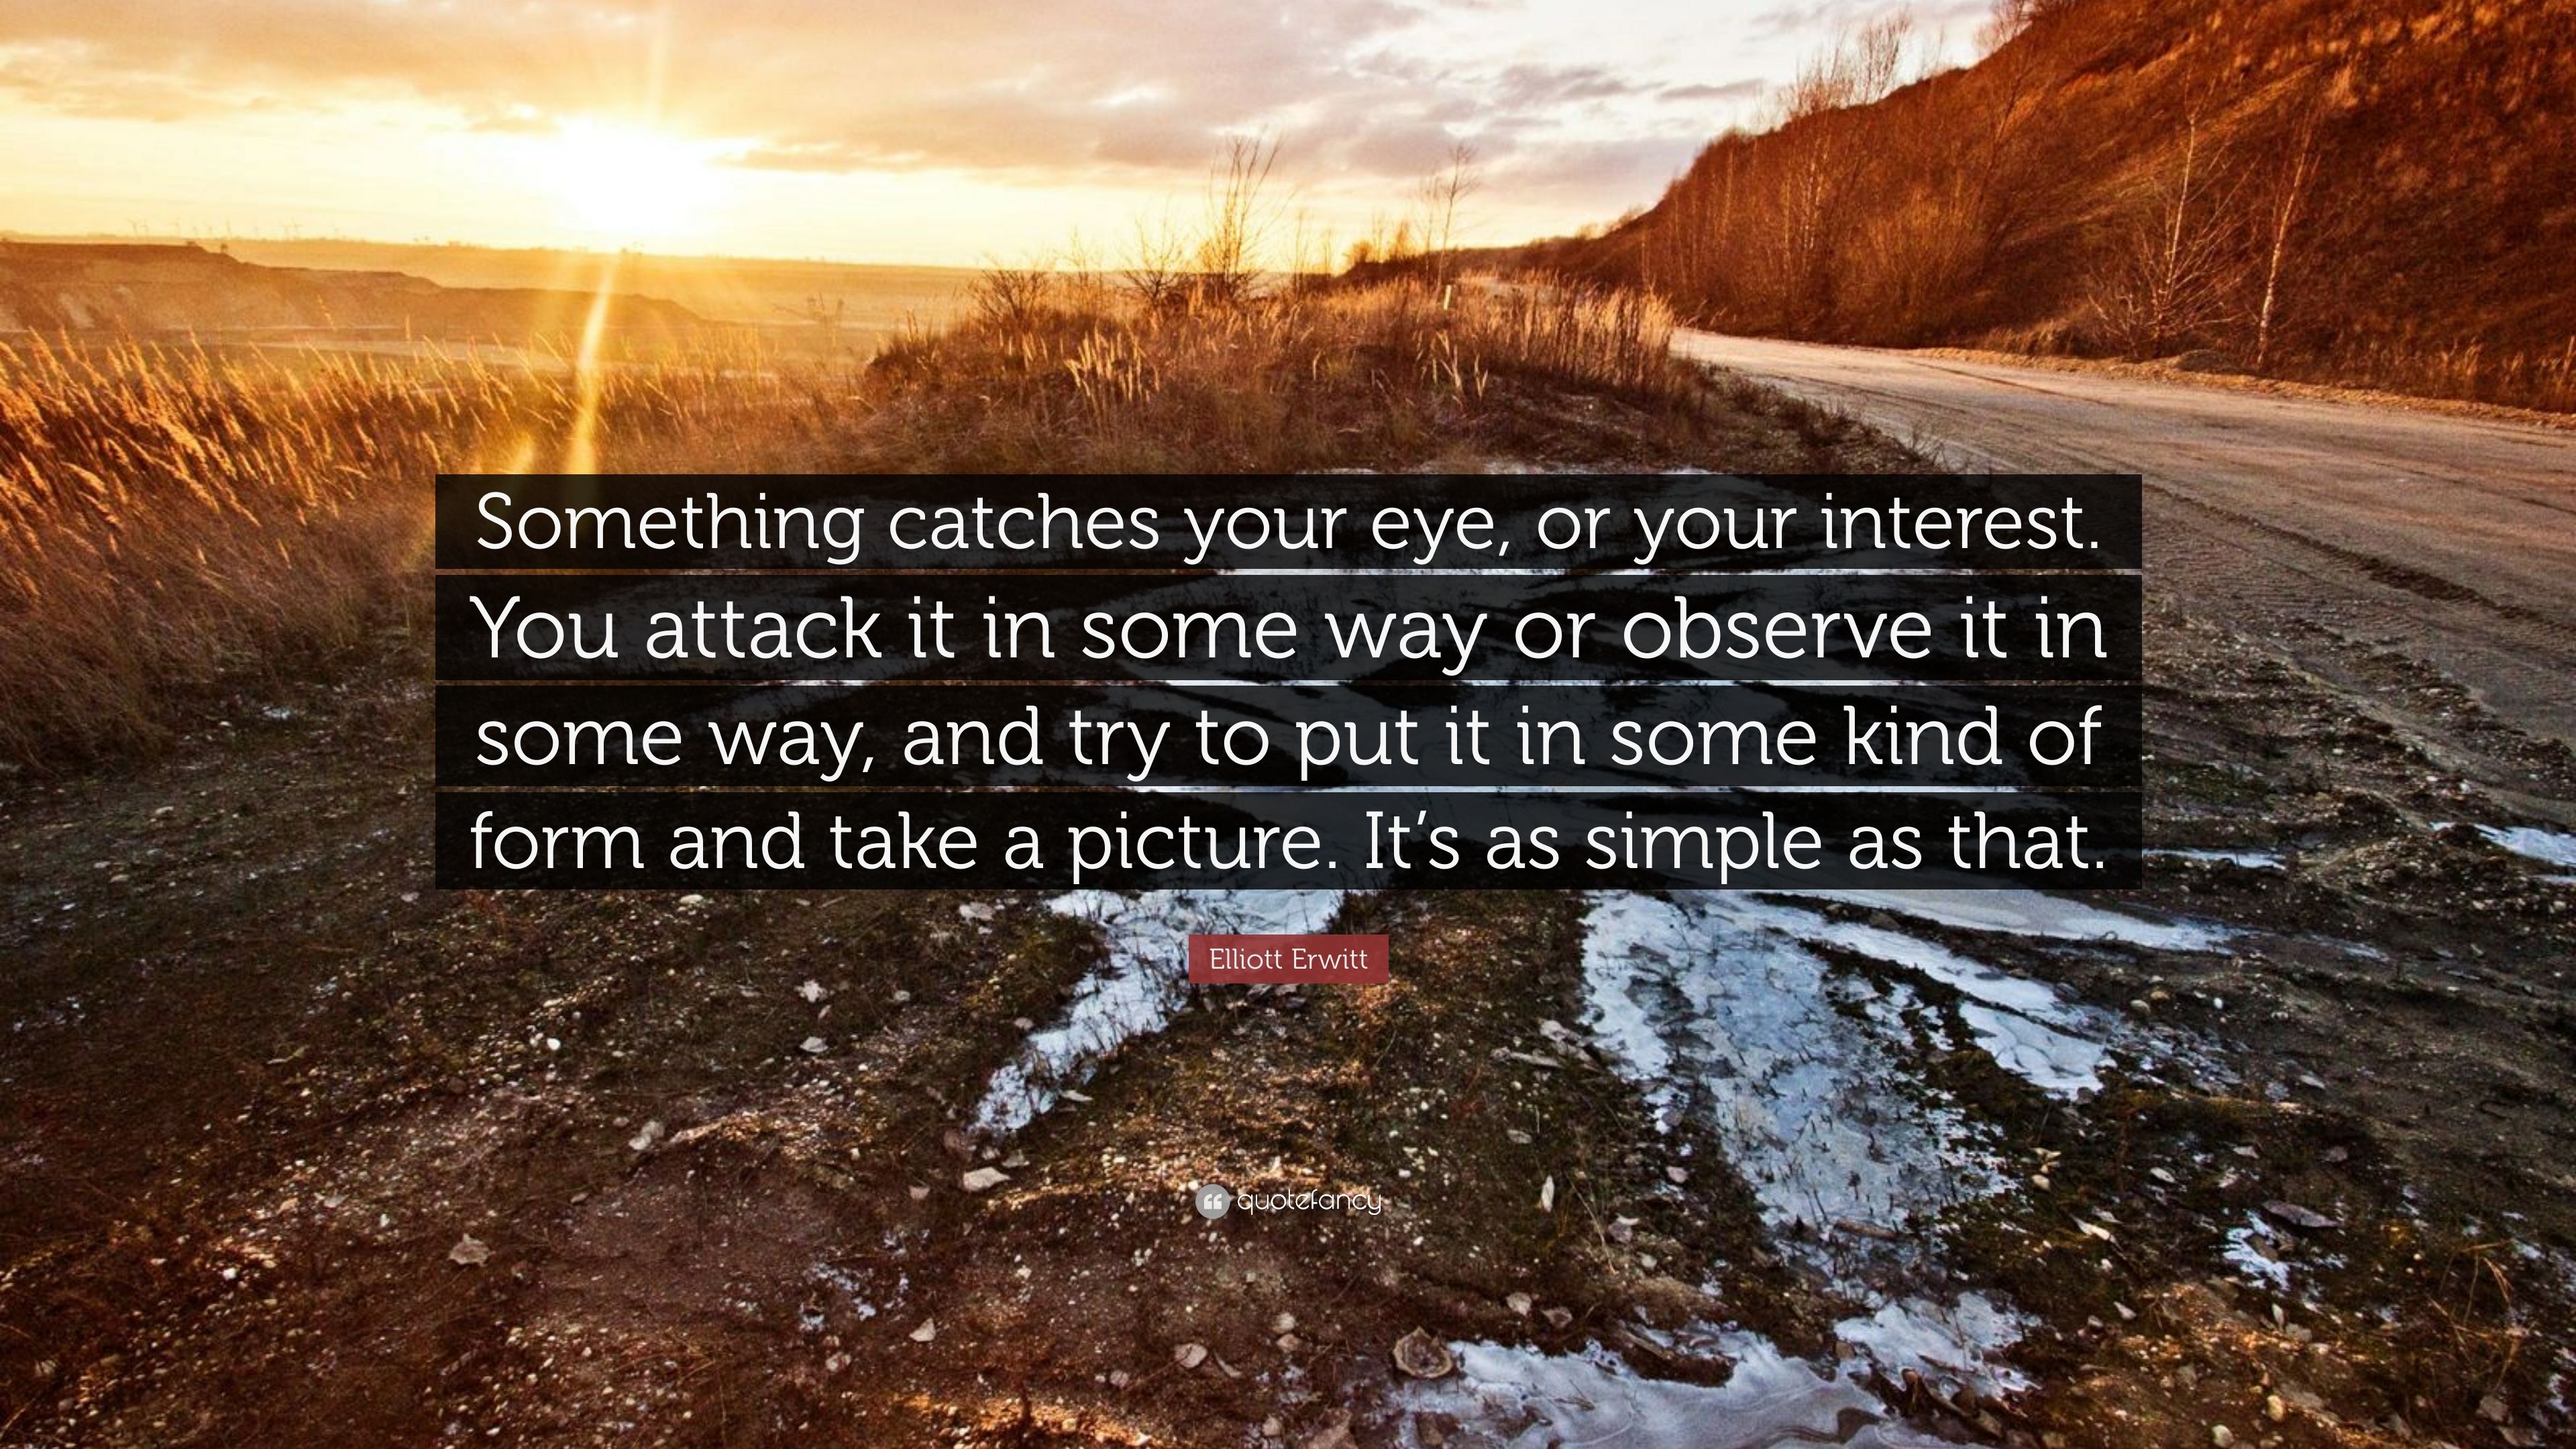 Elliott Erwitt Quote: “Something catches your eye, or your interest ...